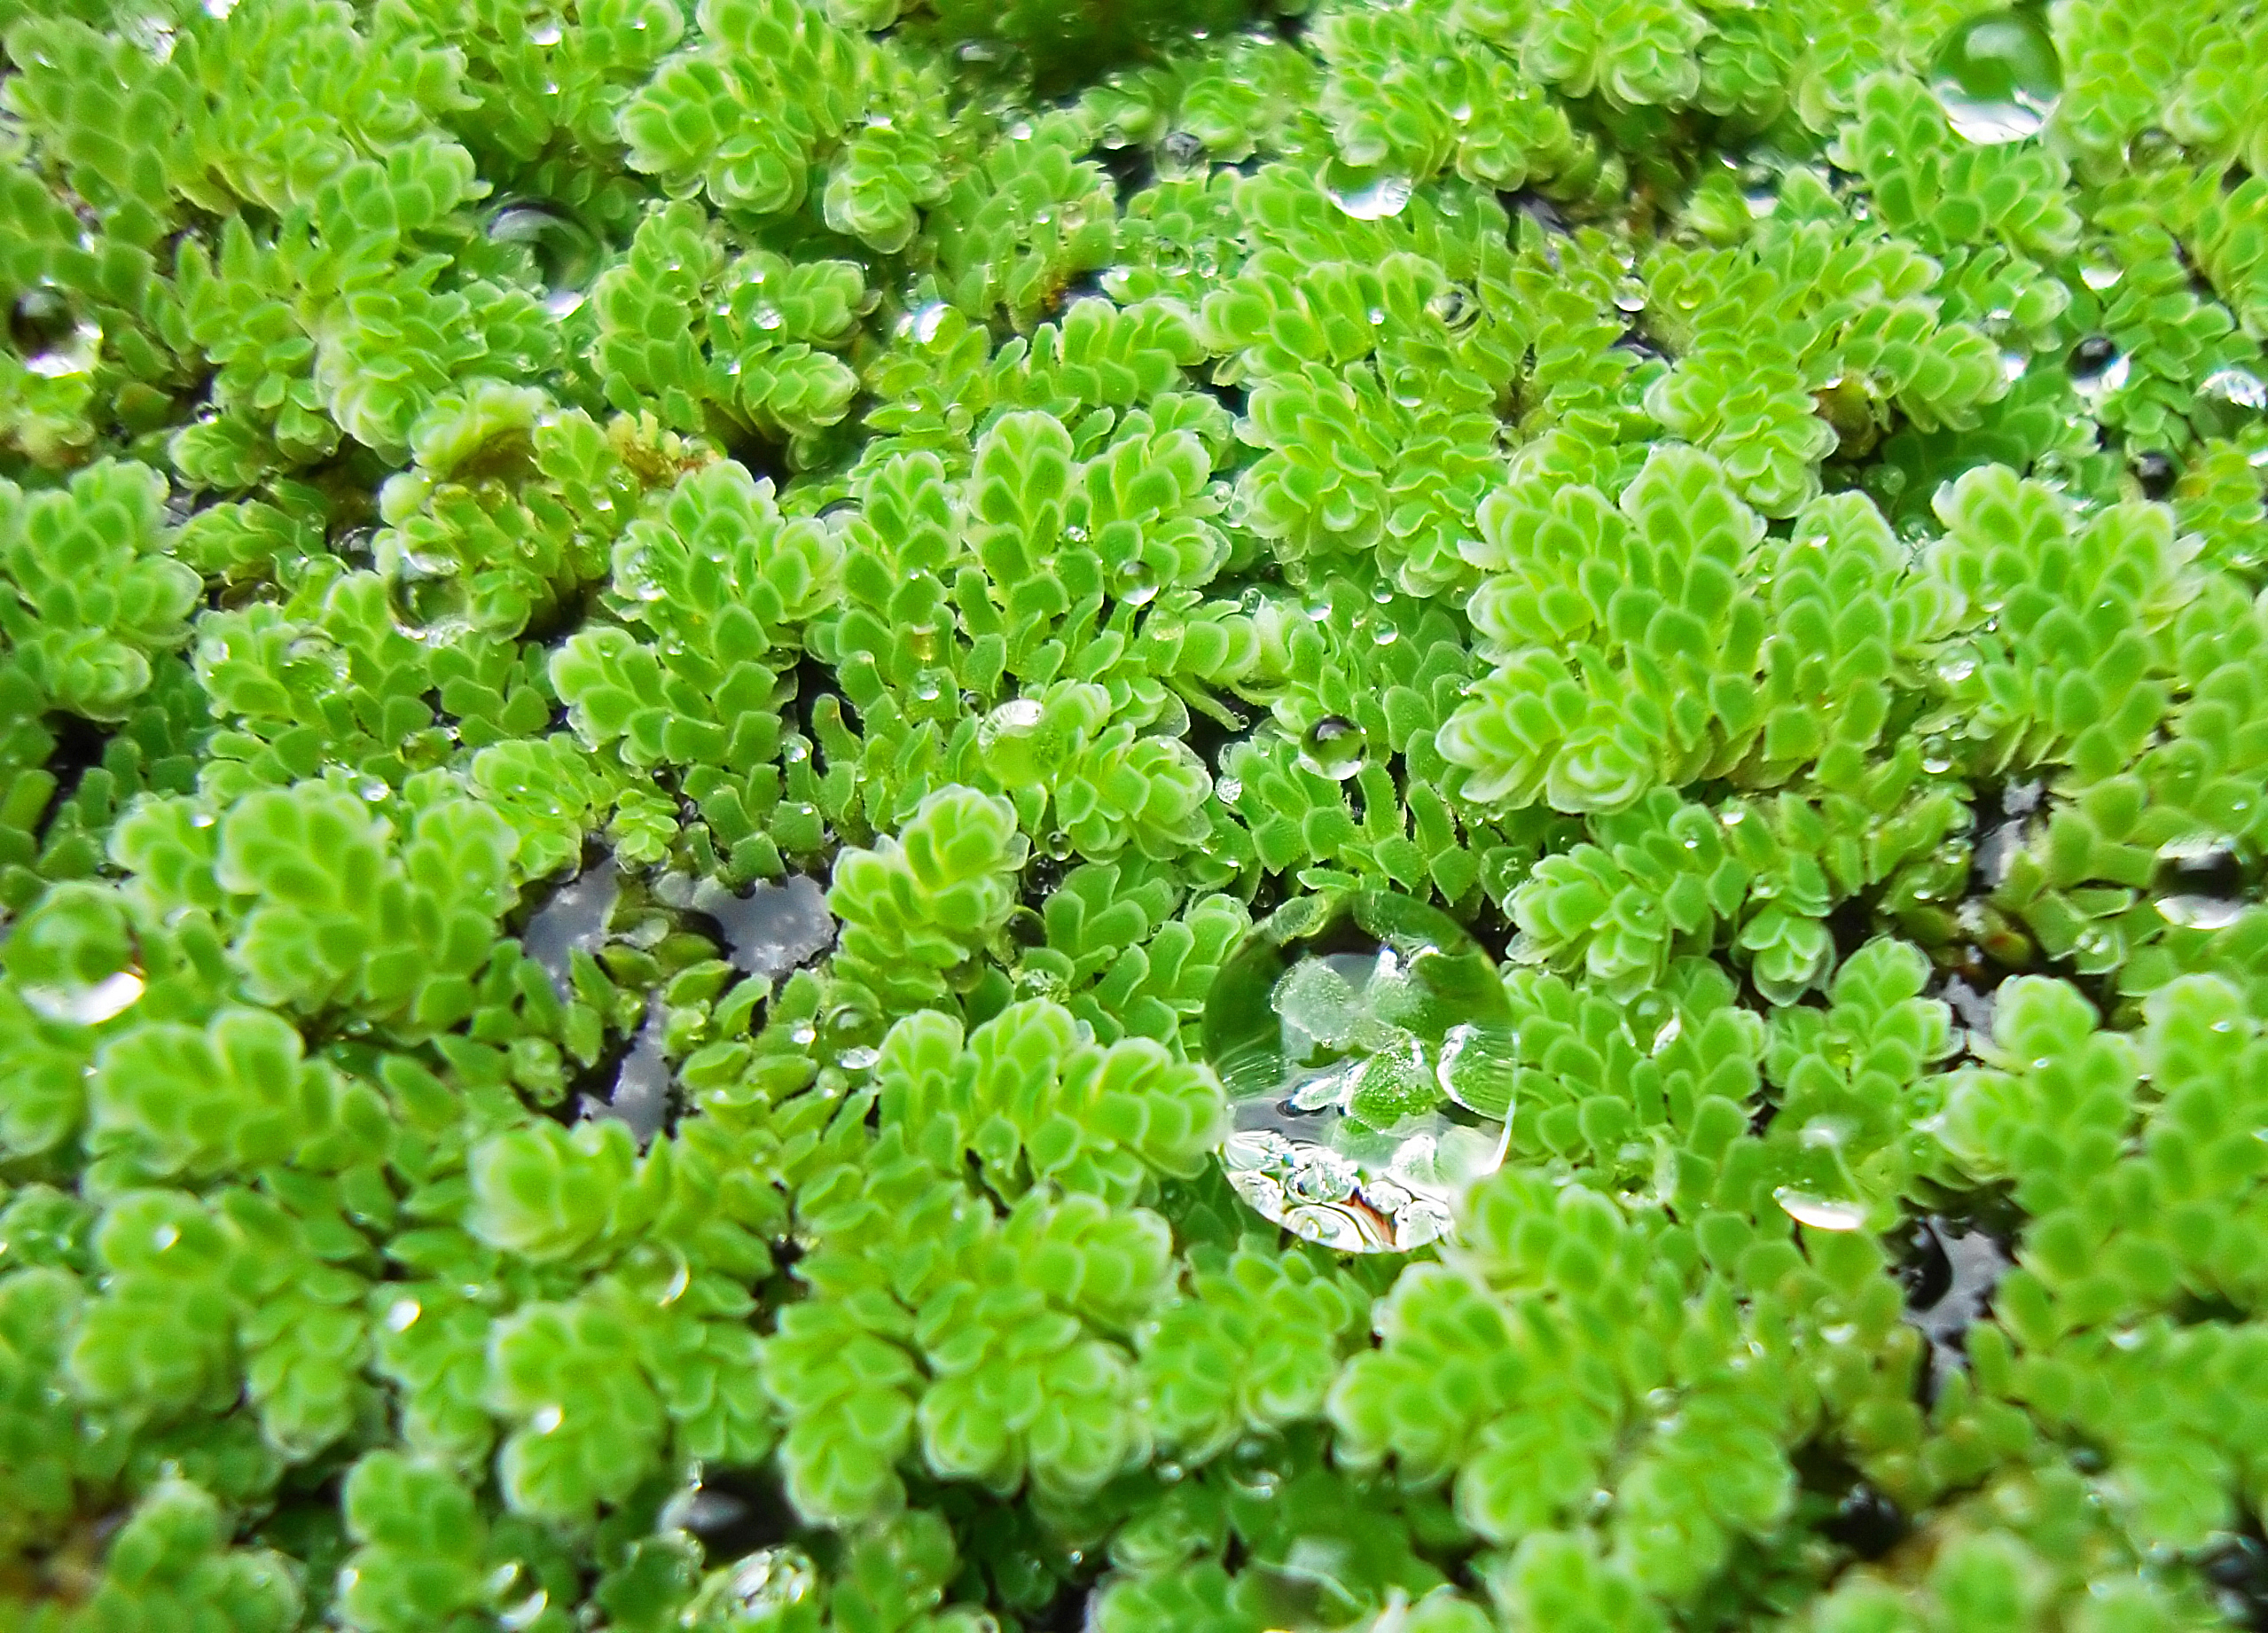 a close up of the small floating fern, Azolla, with water droplets on the surface